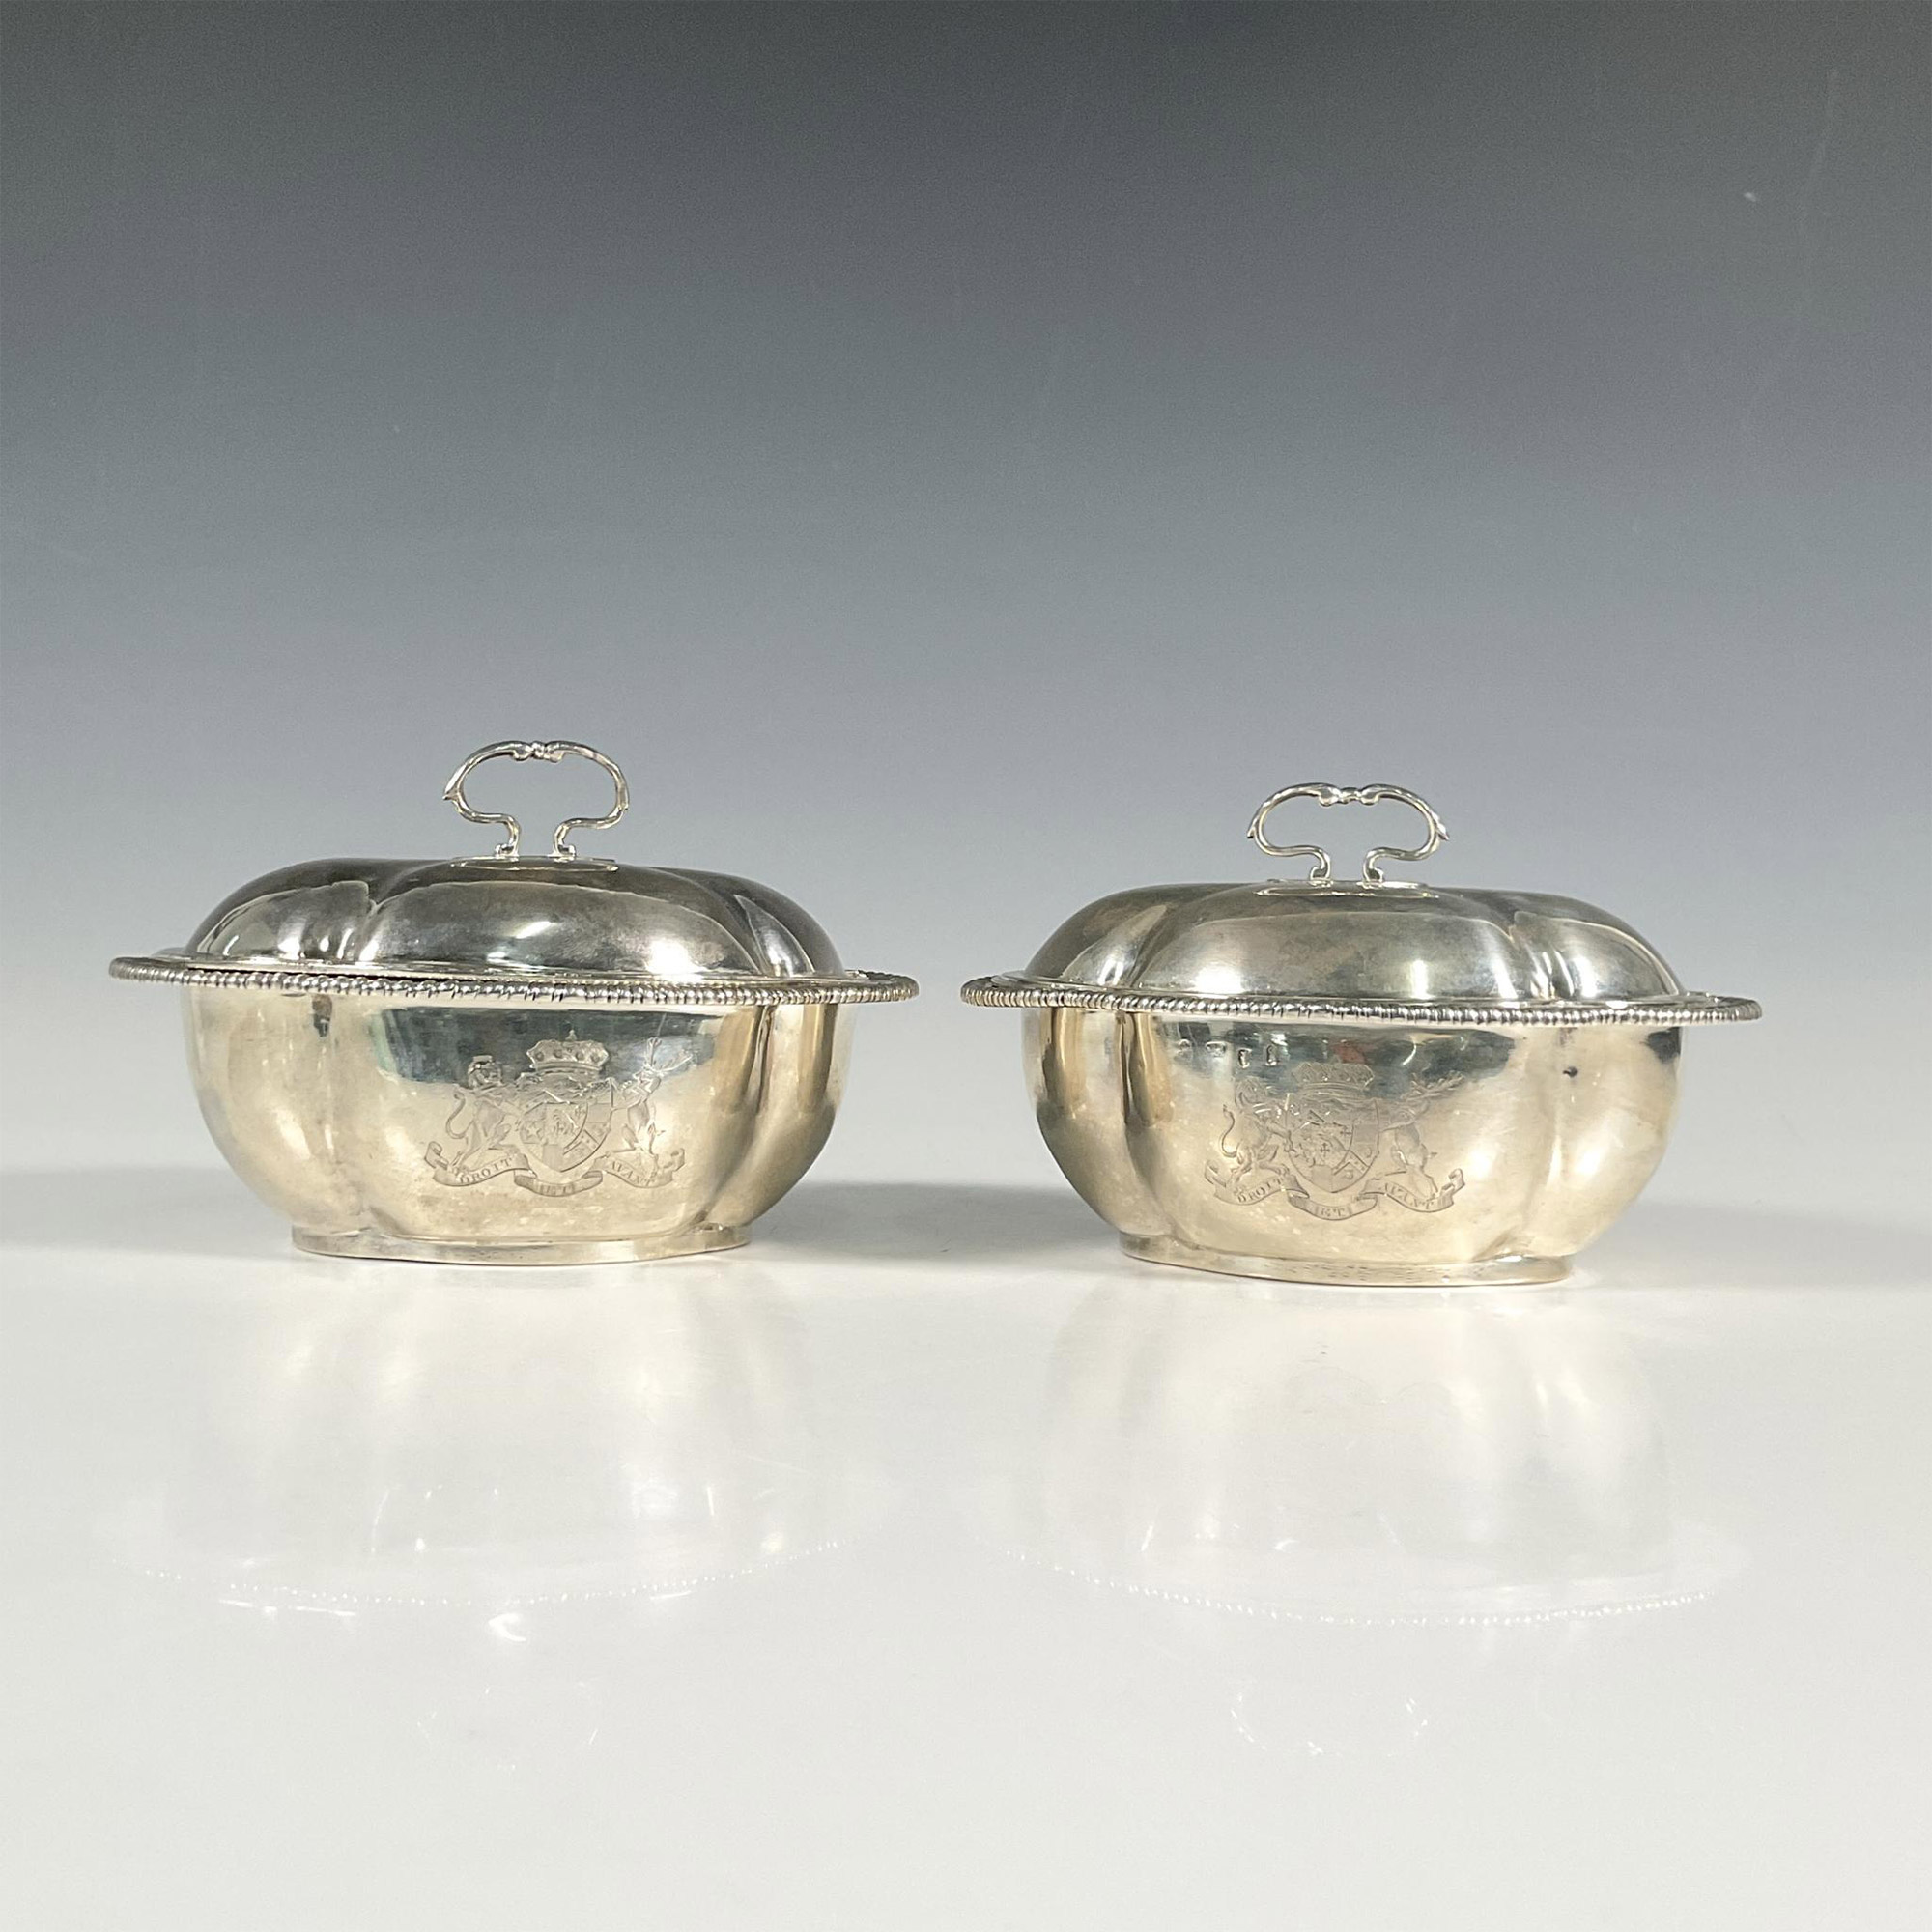 Pair of Thomas Heming George I Silver Covered Saucers - Image 2 of 5